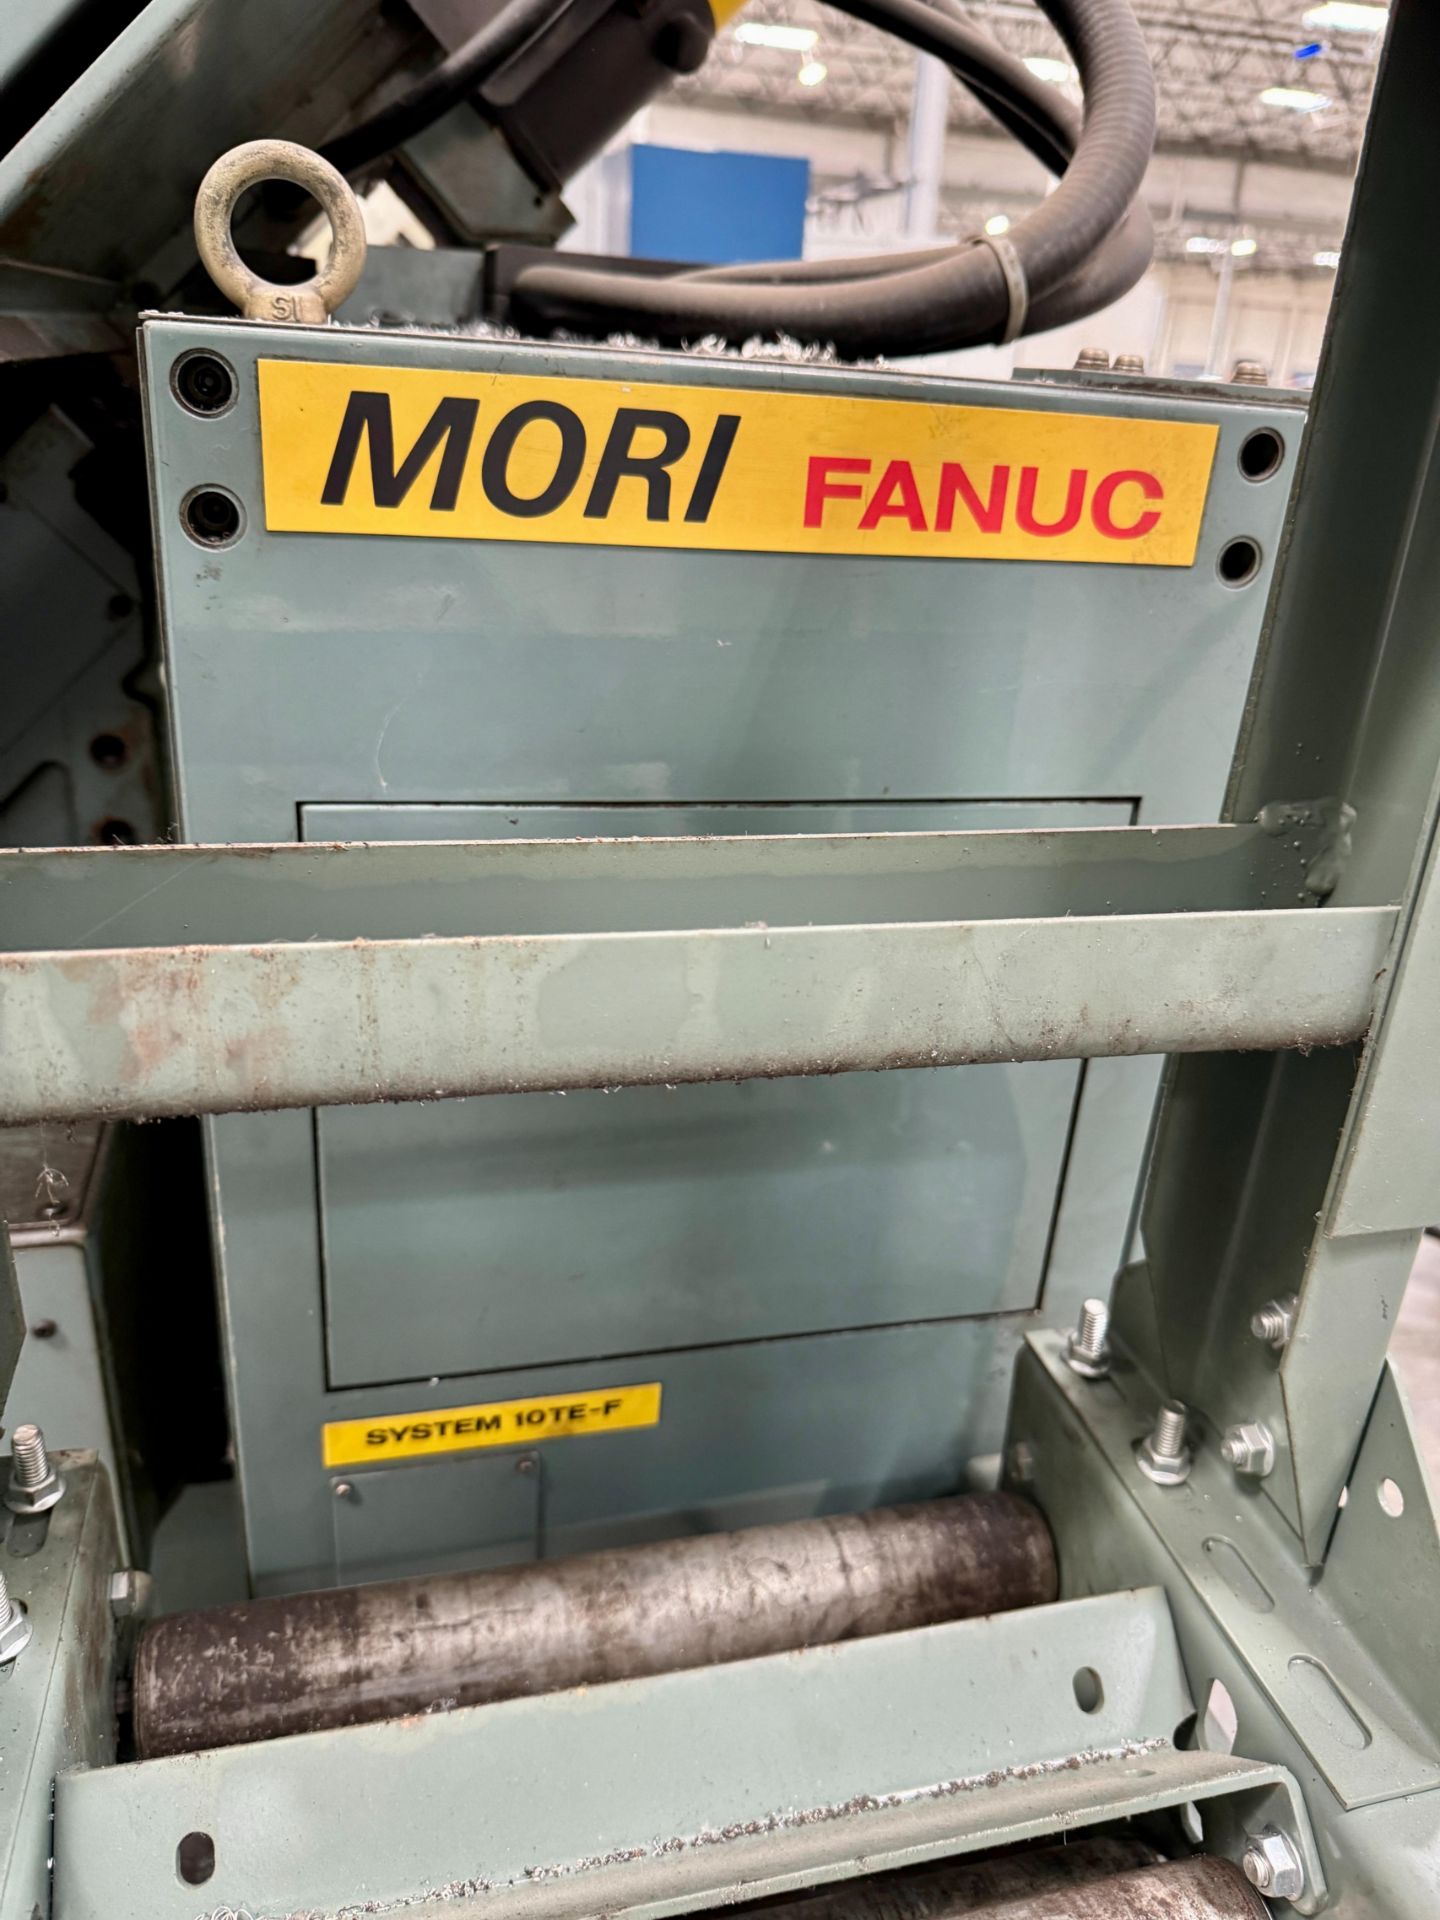 MORI SEIKI SL-1A TURNING CENTER, FANUC SYSTEM 10TE-F CONTROL, TAILSTOCK, CHIP CONVEYOR, S/N 736 - Image 10 of 17